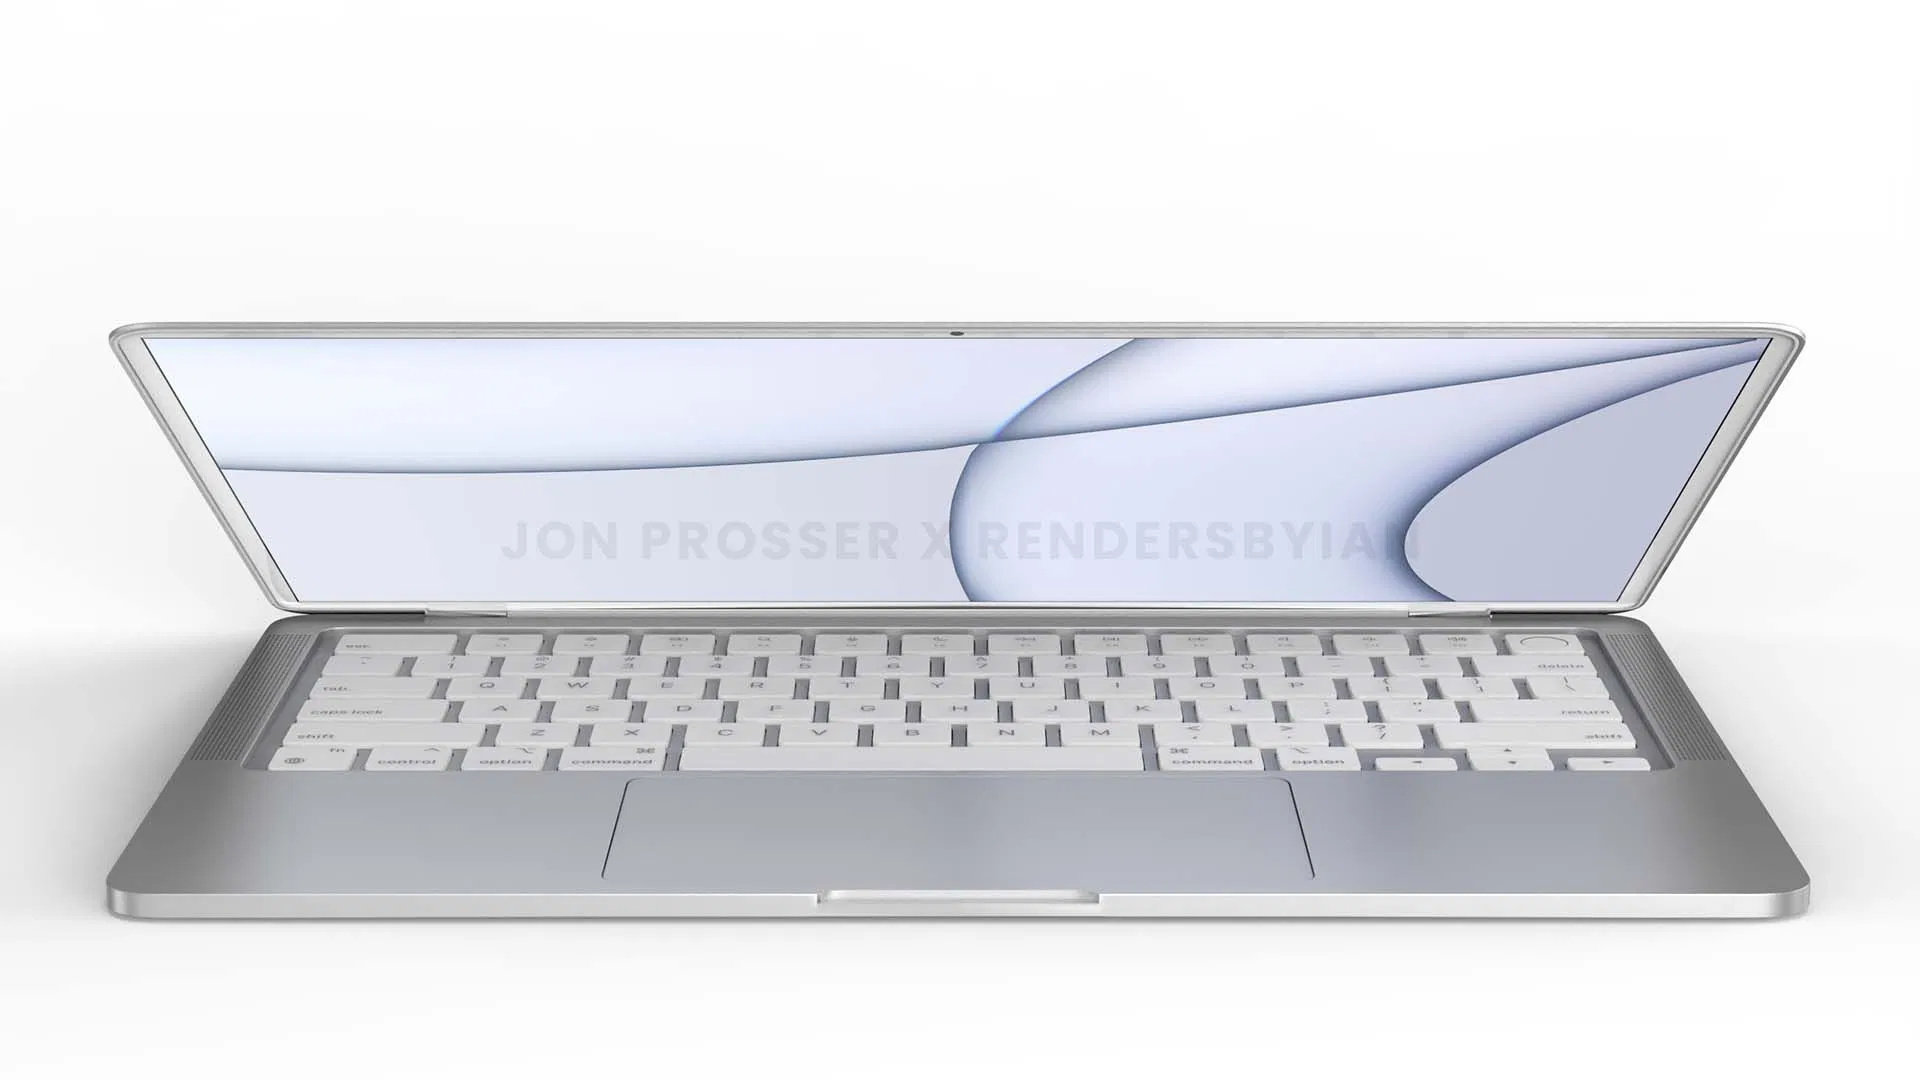 Apple Macbook Air With Colourful New Designs May Release By The End Of 2021